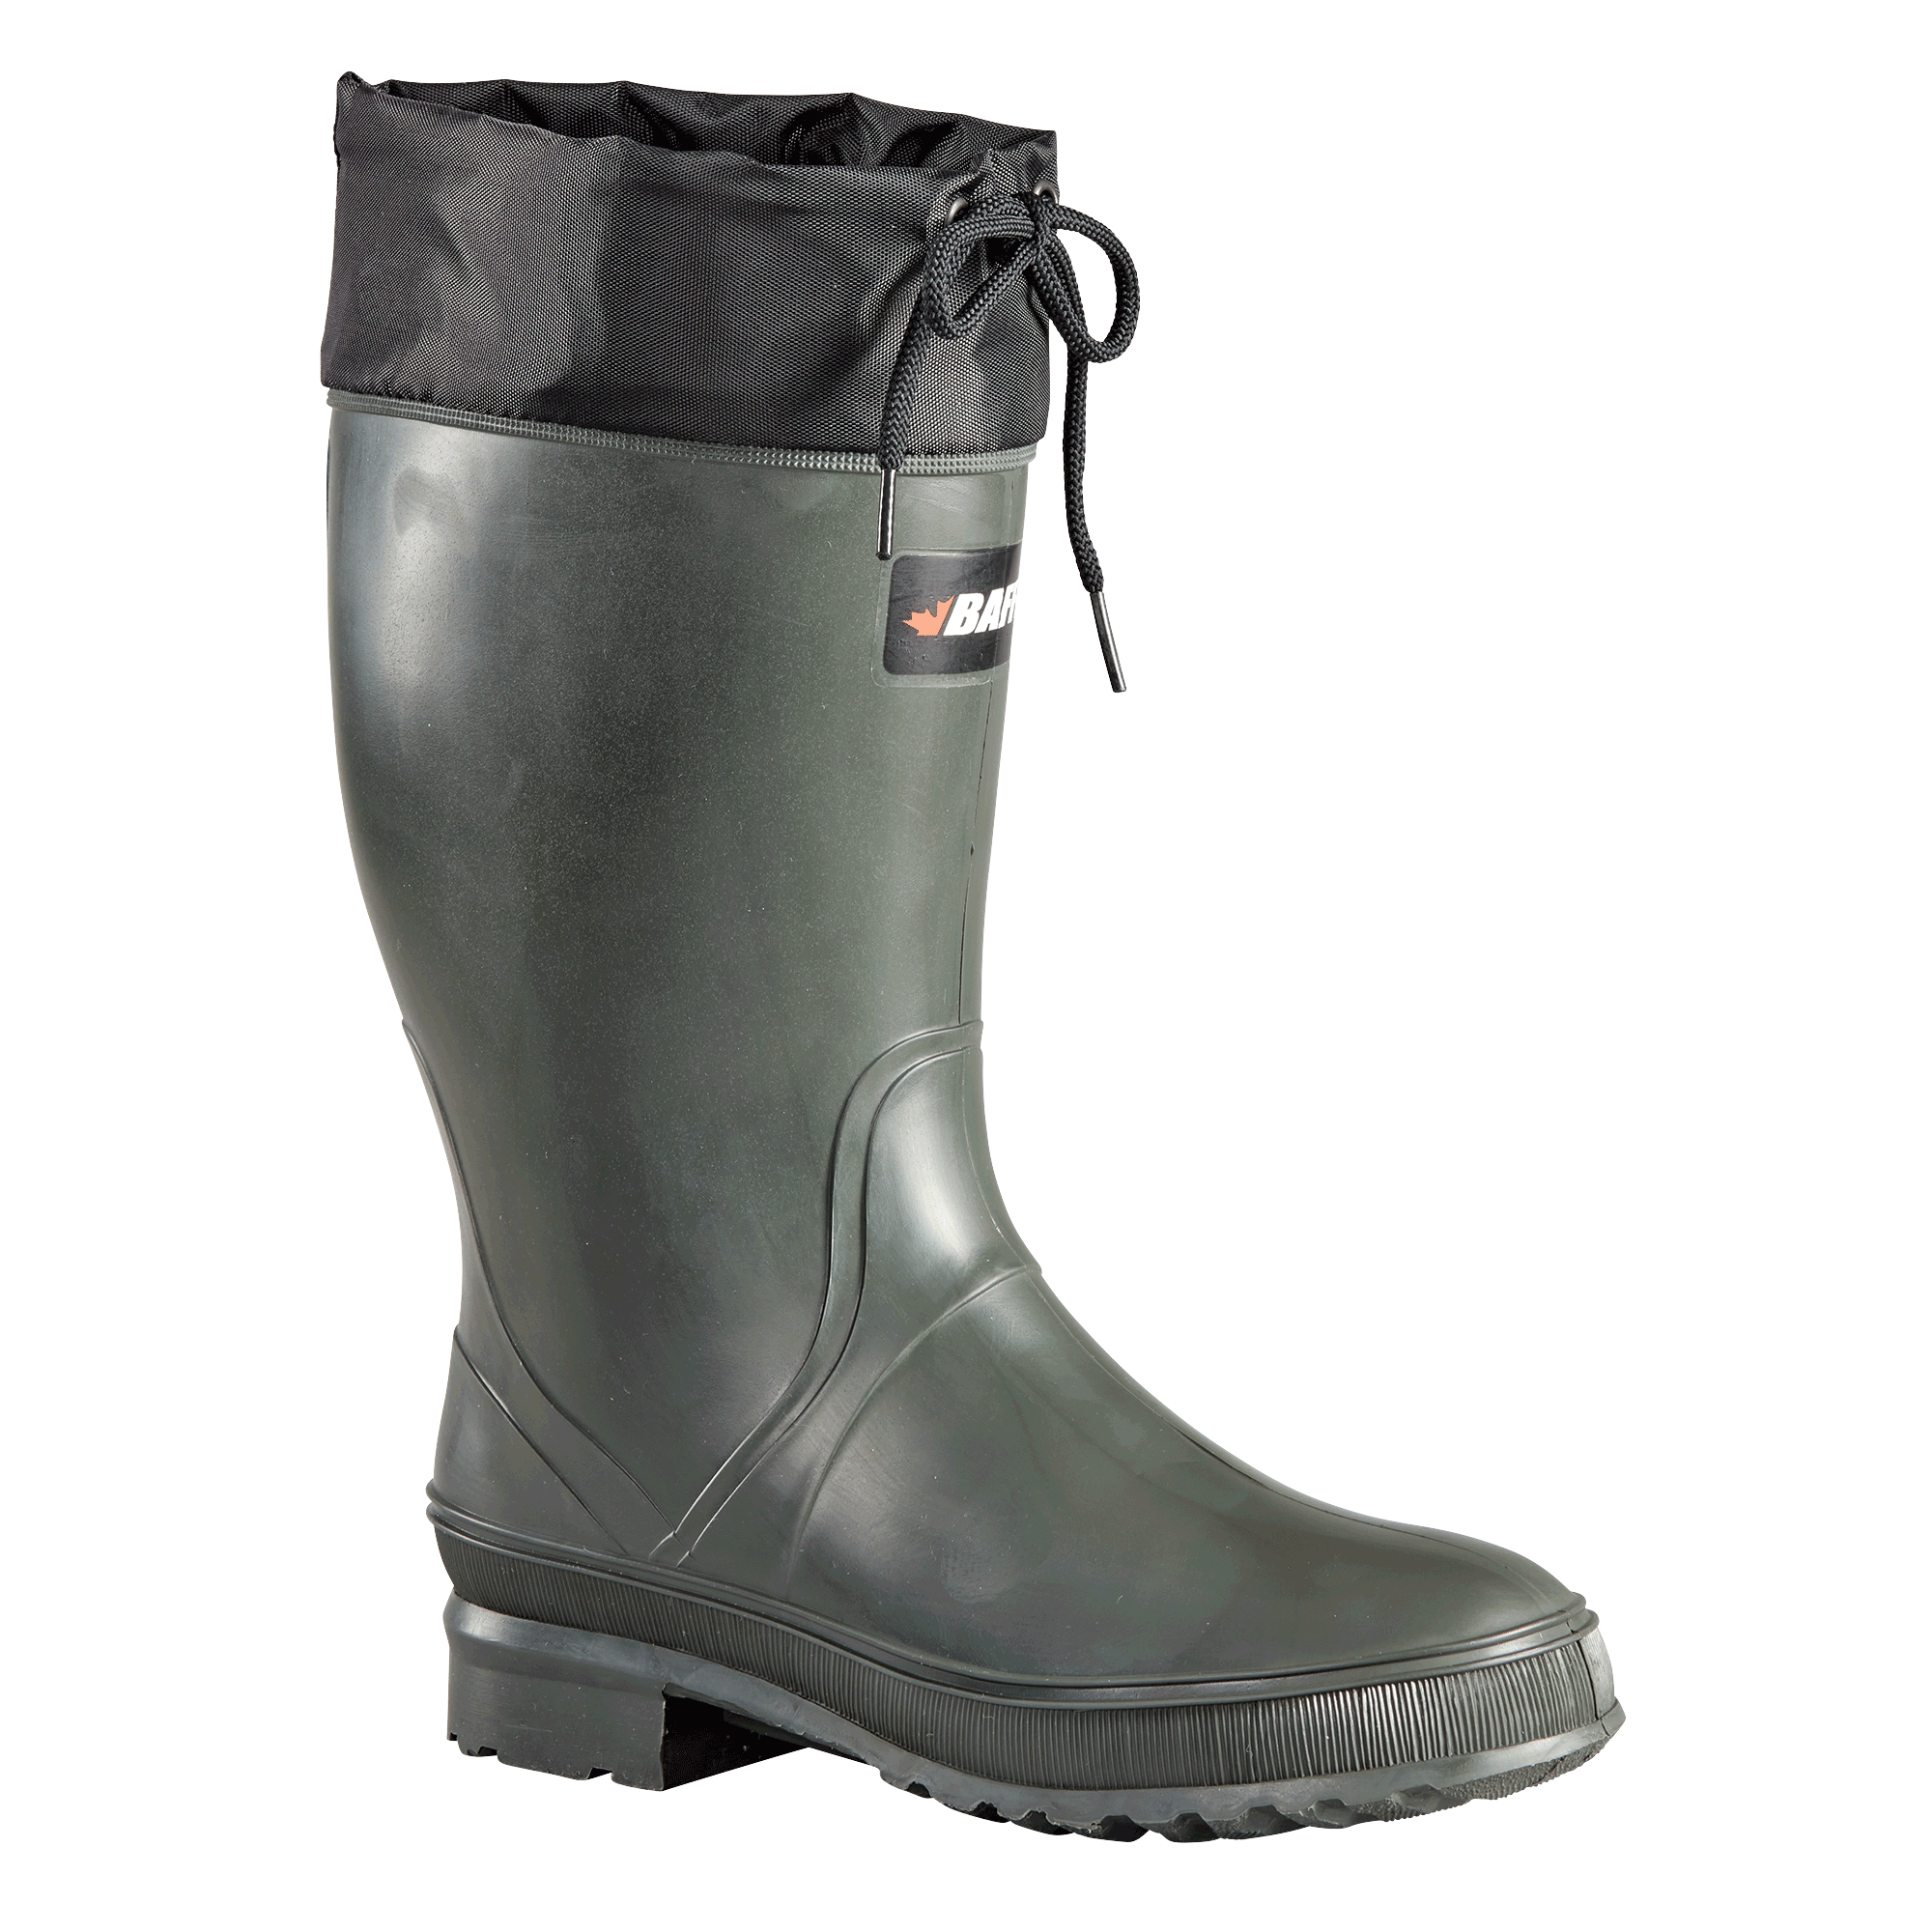 STORM (Plain Toe) | Women's Boot – Baffin - Born in the North '79